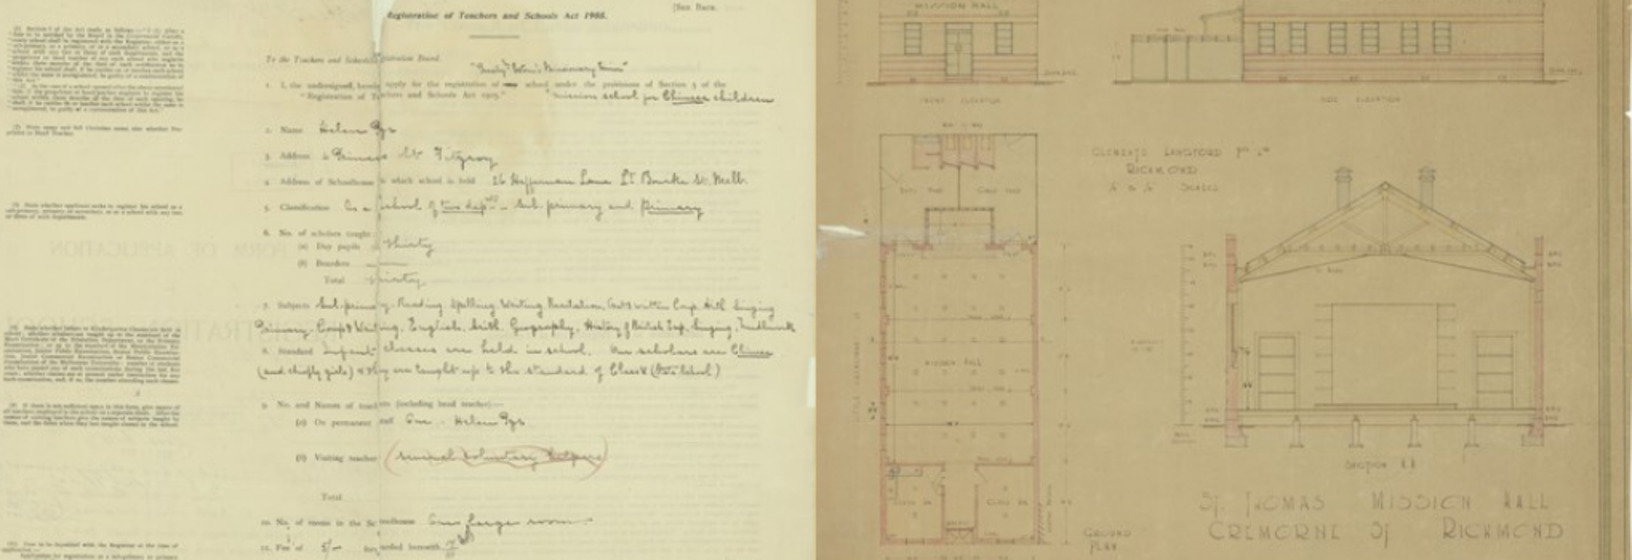 collage of registration form and architectural plans for the Ragged school story